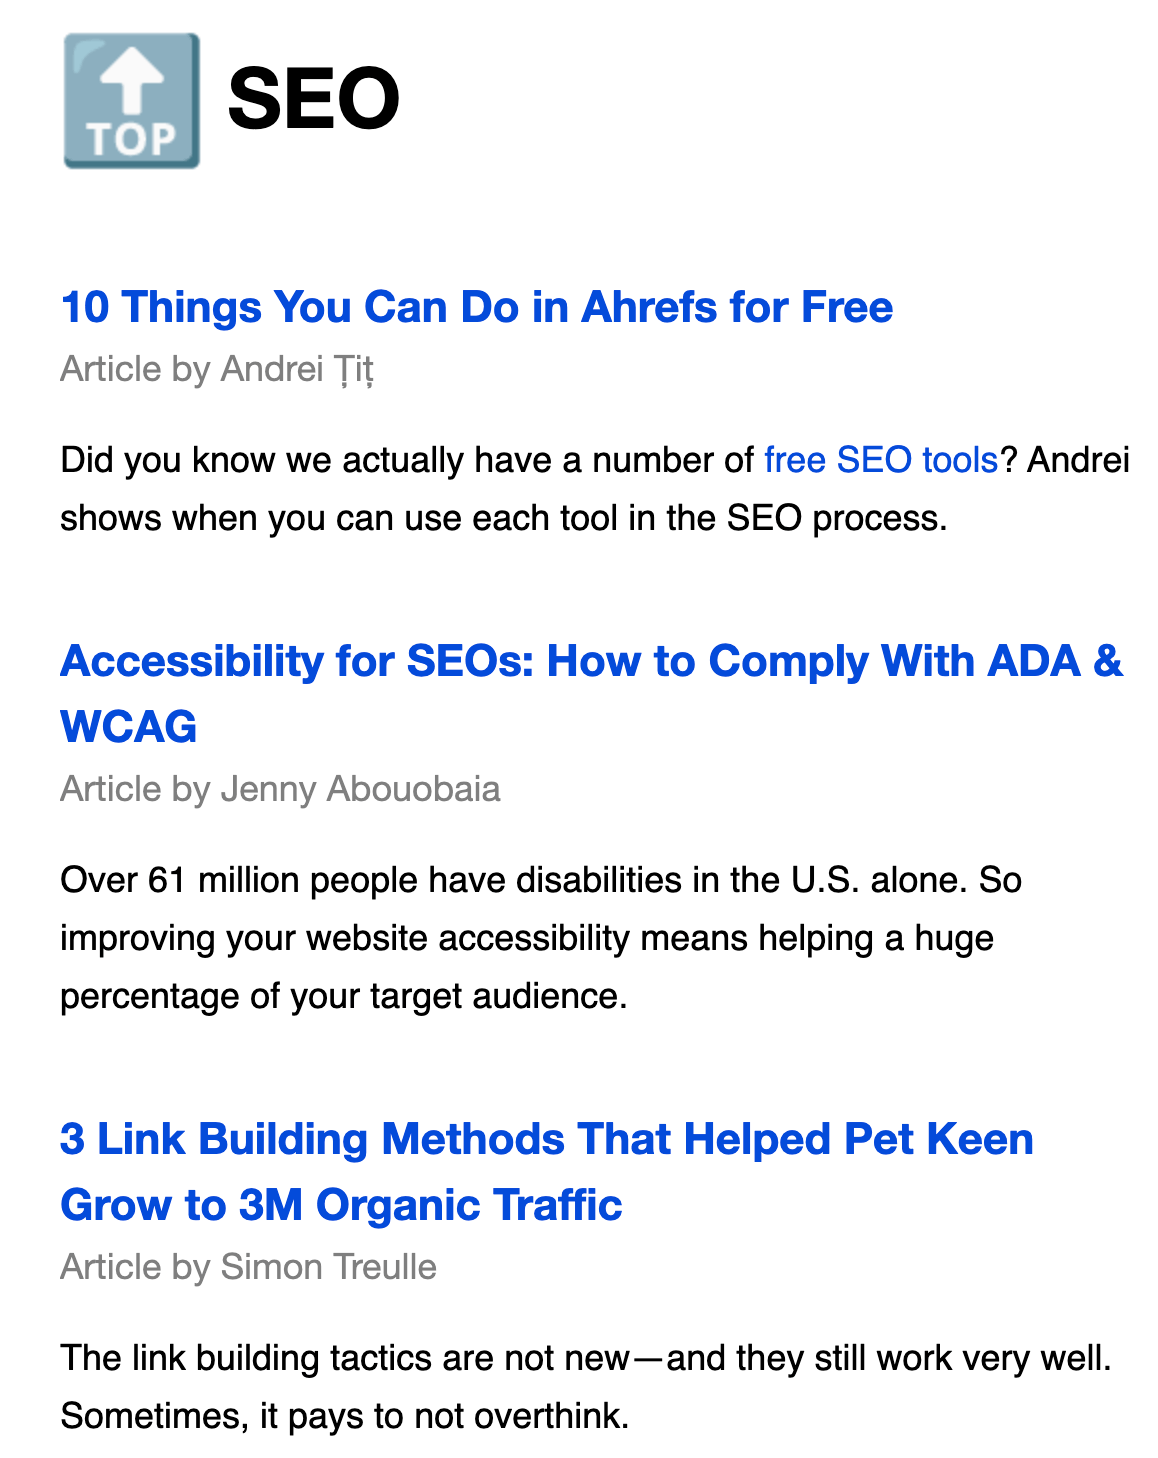 Example of an Ahrefs' Digest issue
